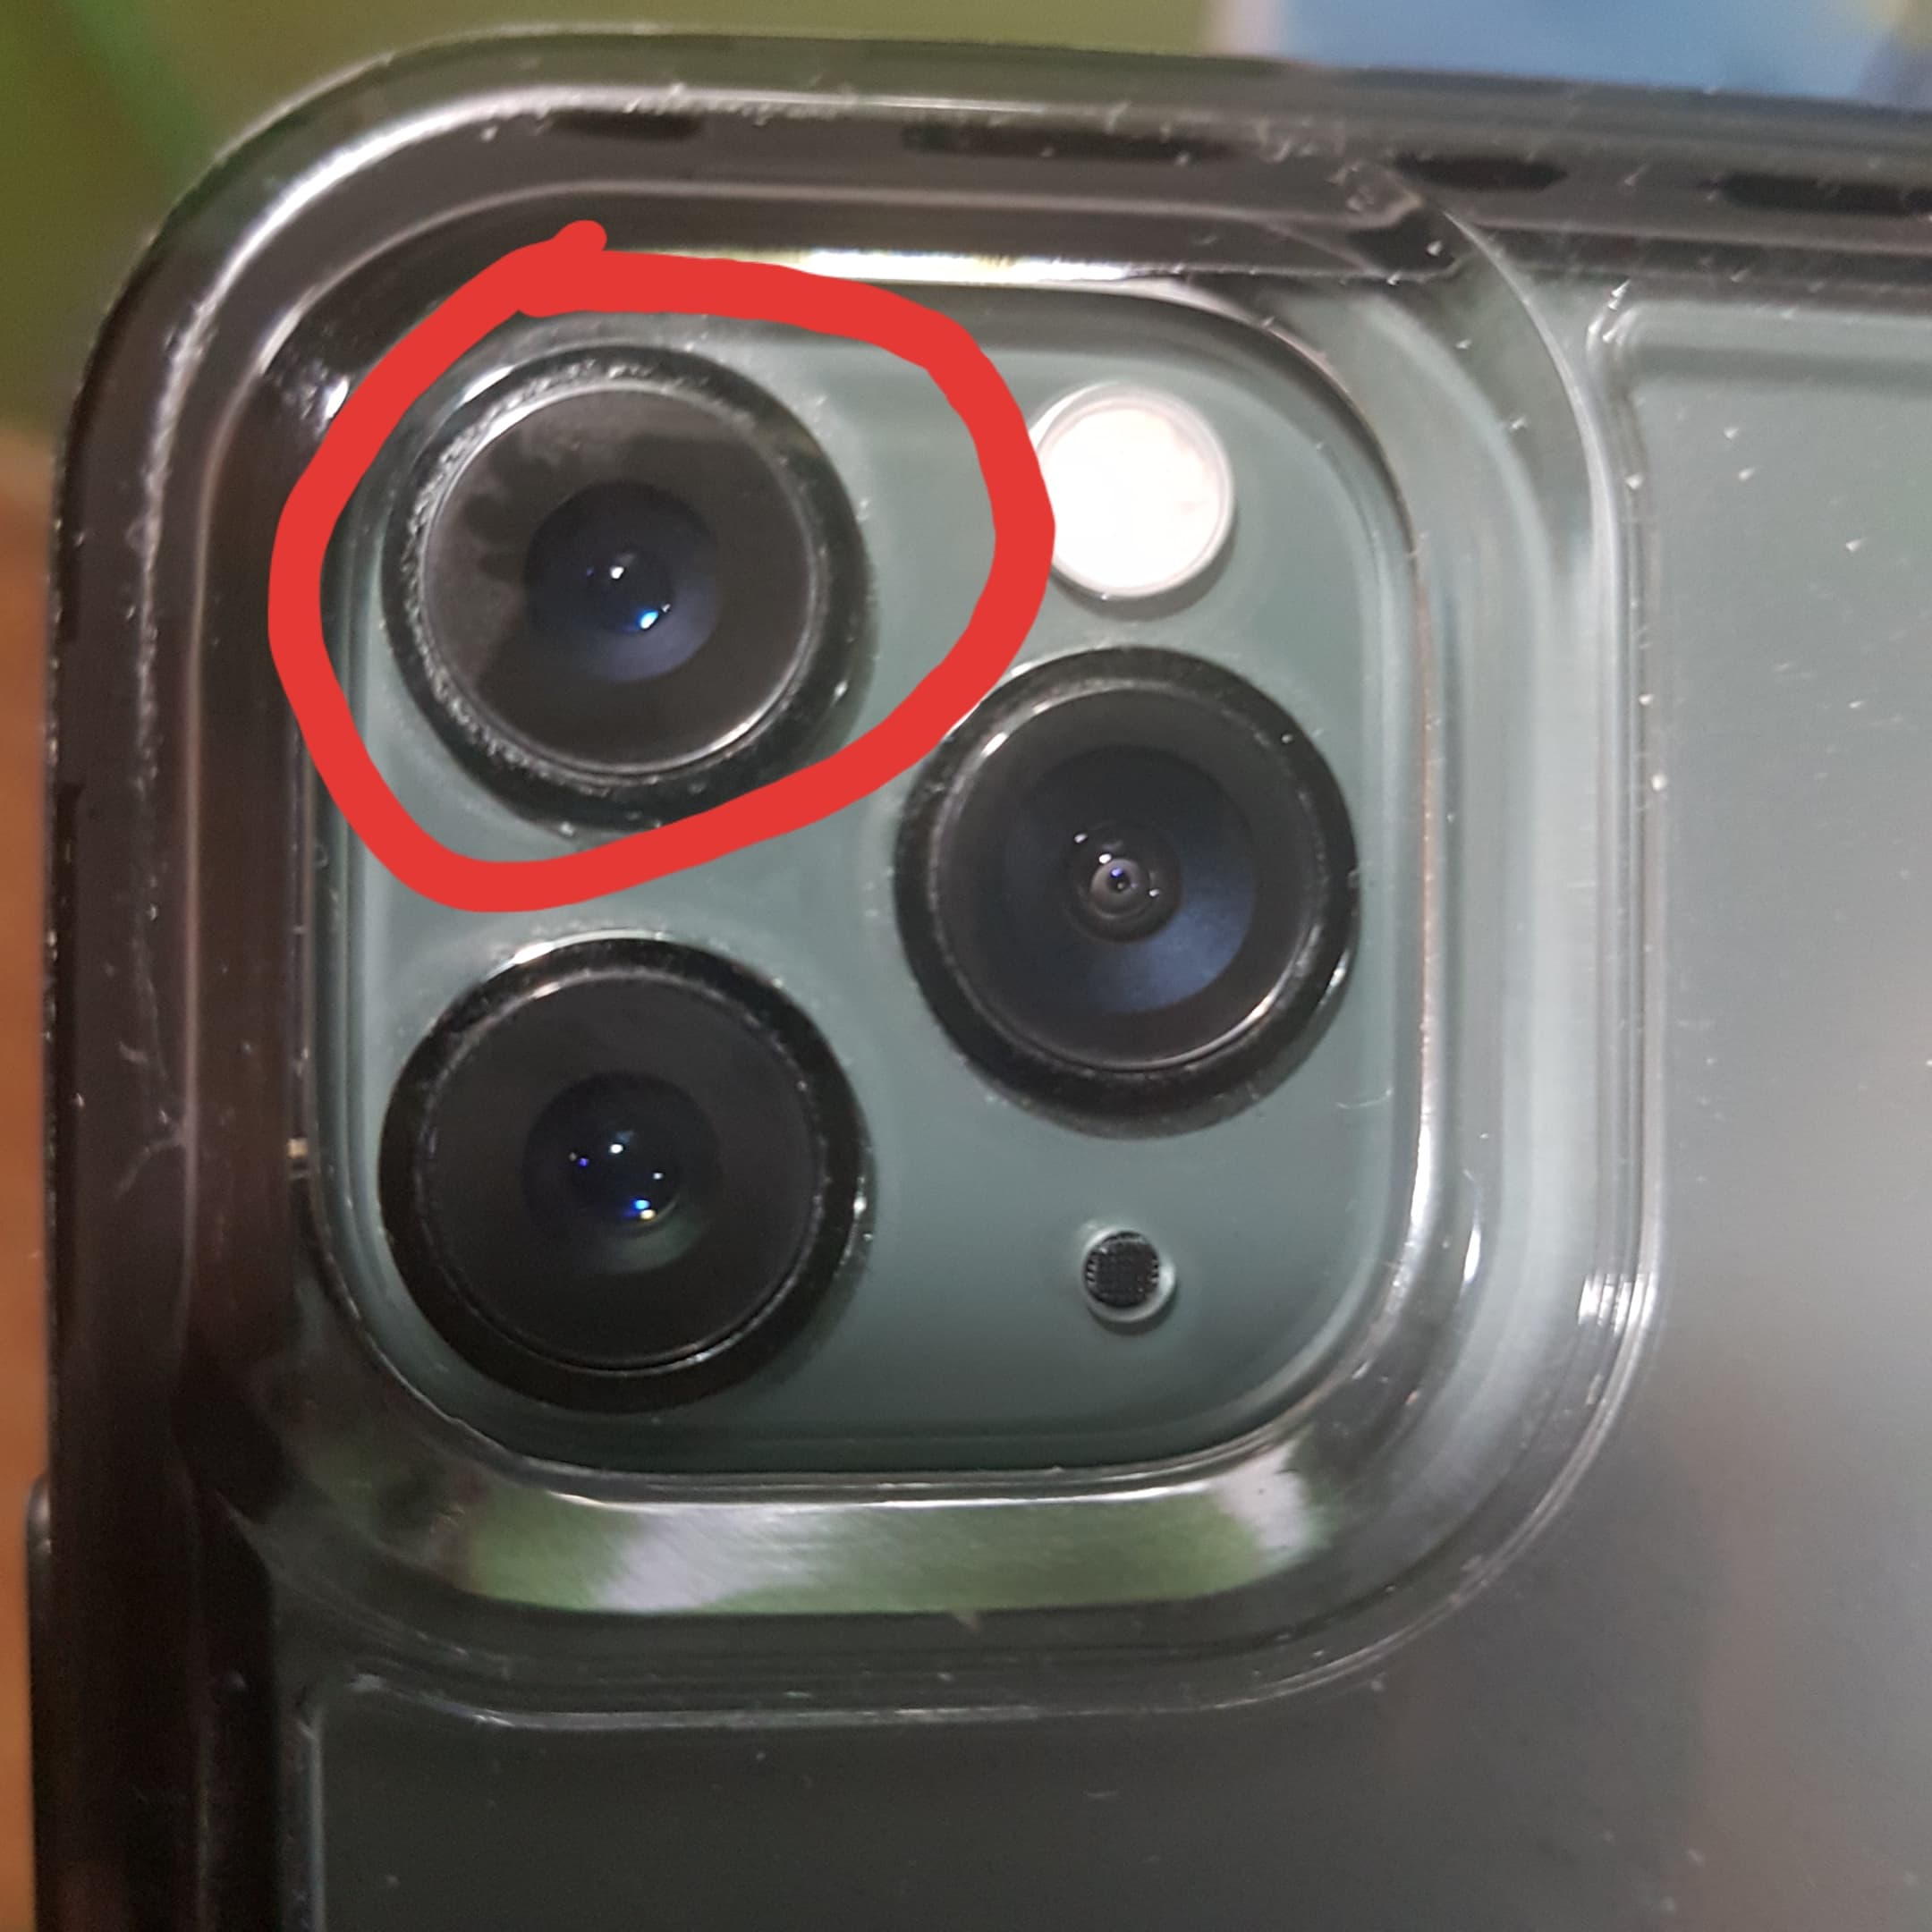 Is iPhone camera easily scratched?